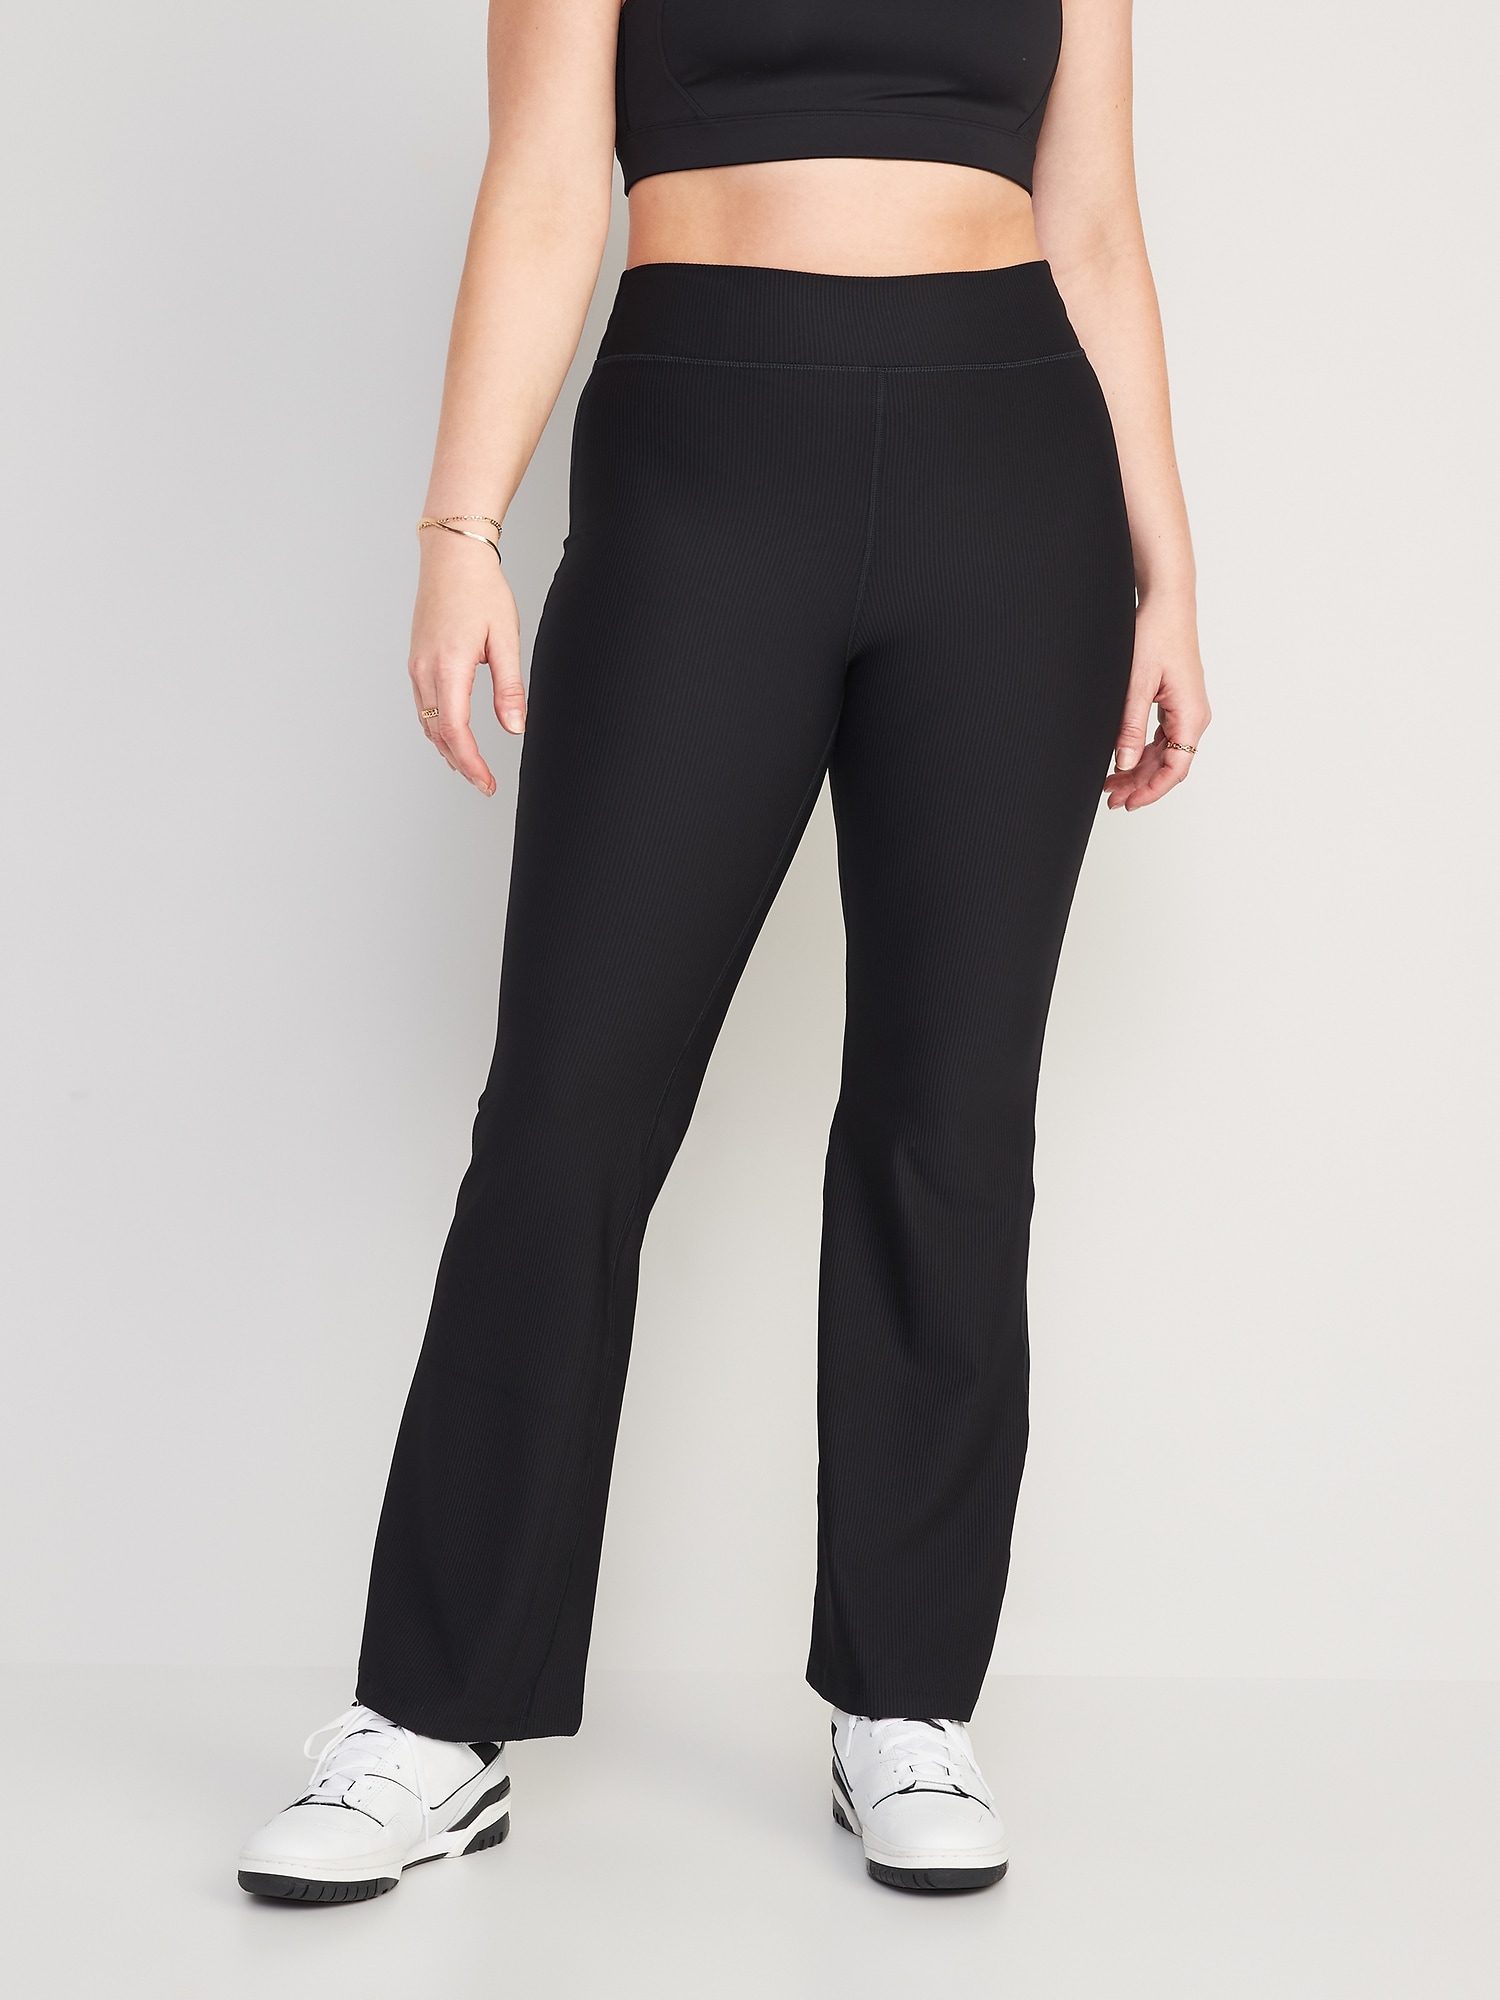 Old navy old navy high waisted elevate powersoft plus size leggings